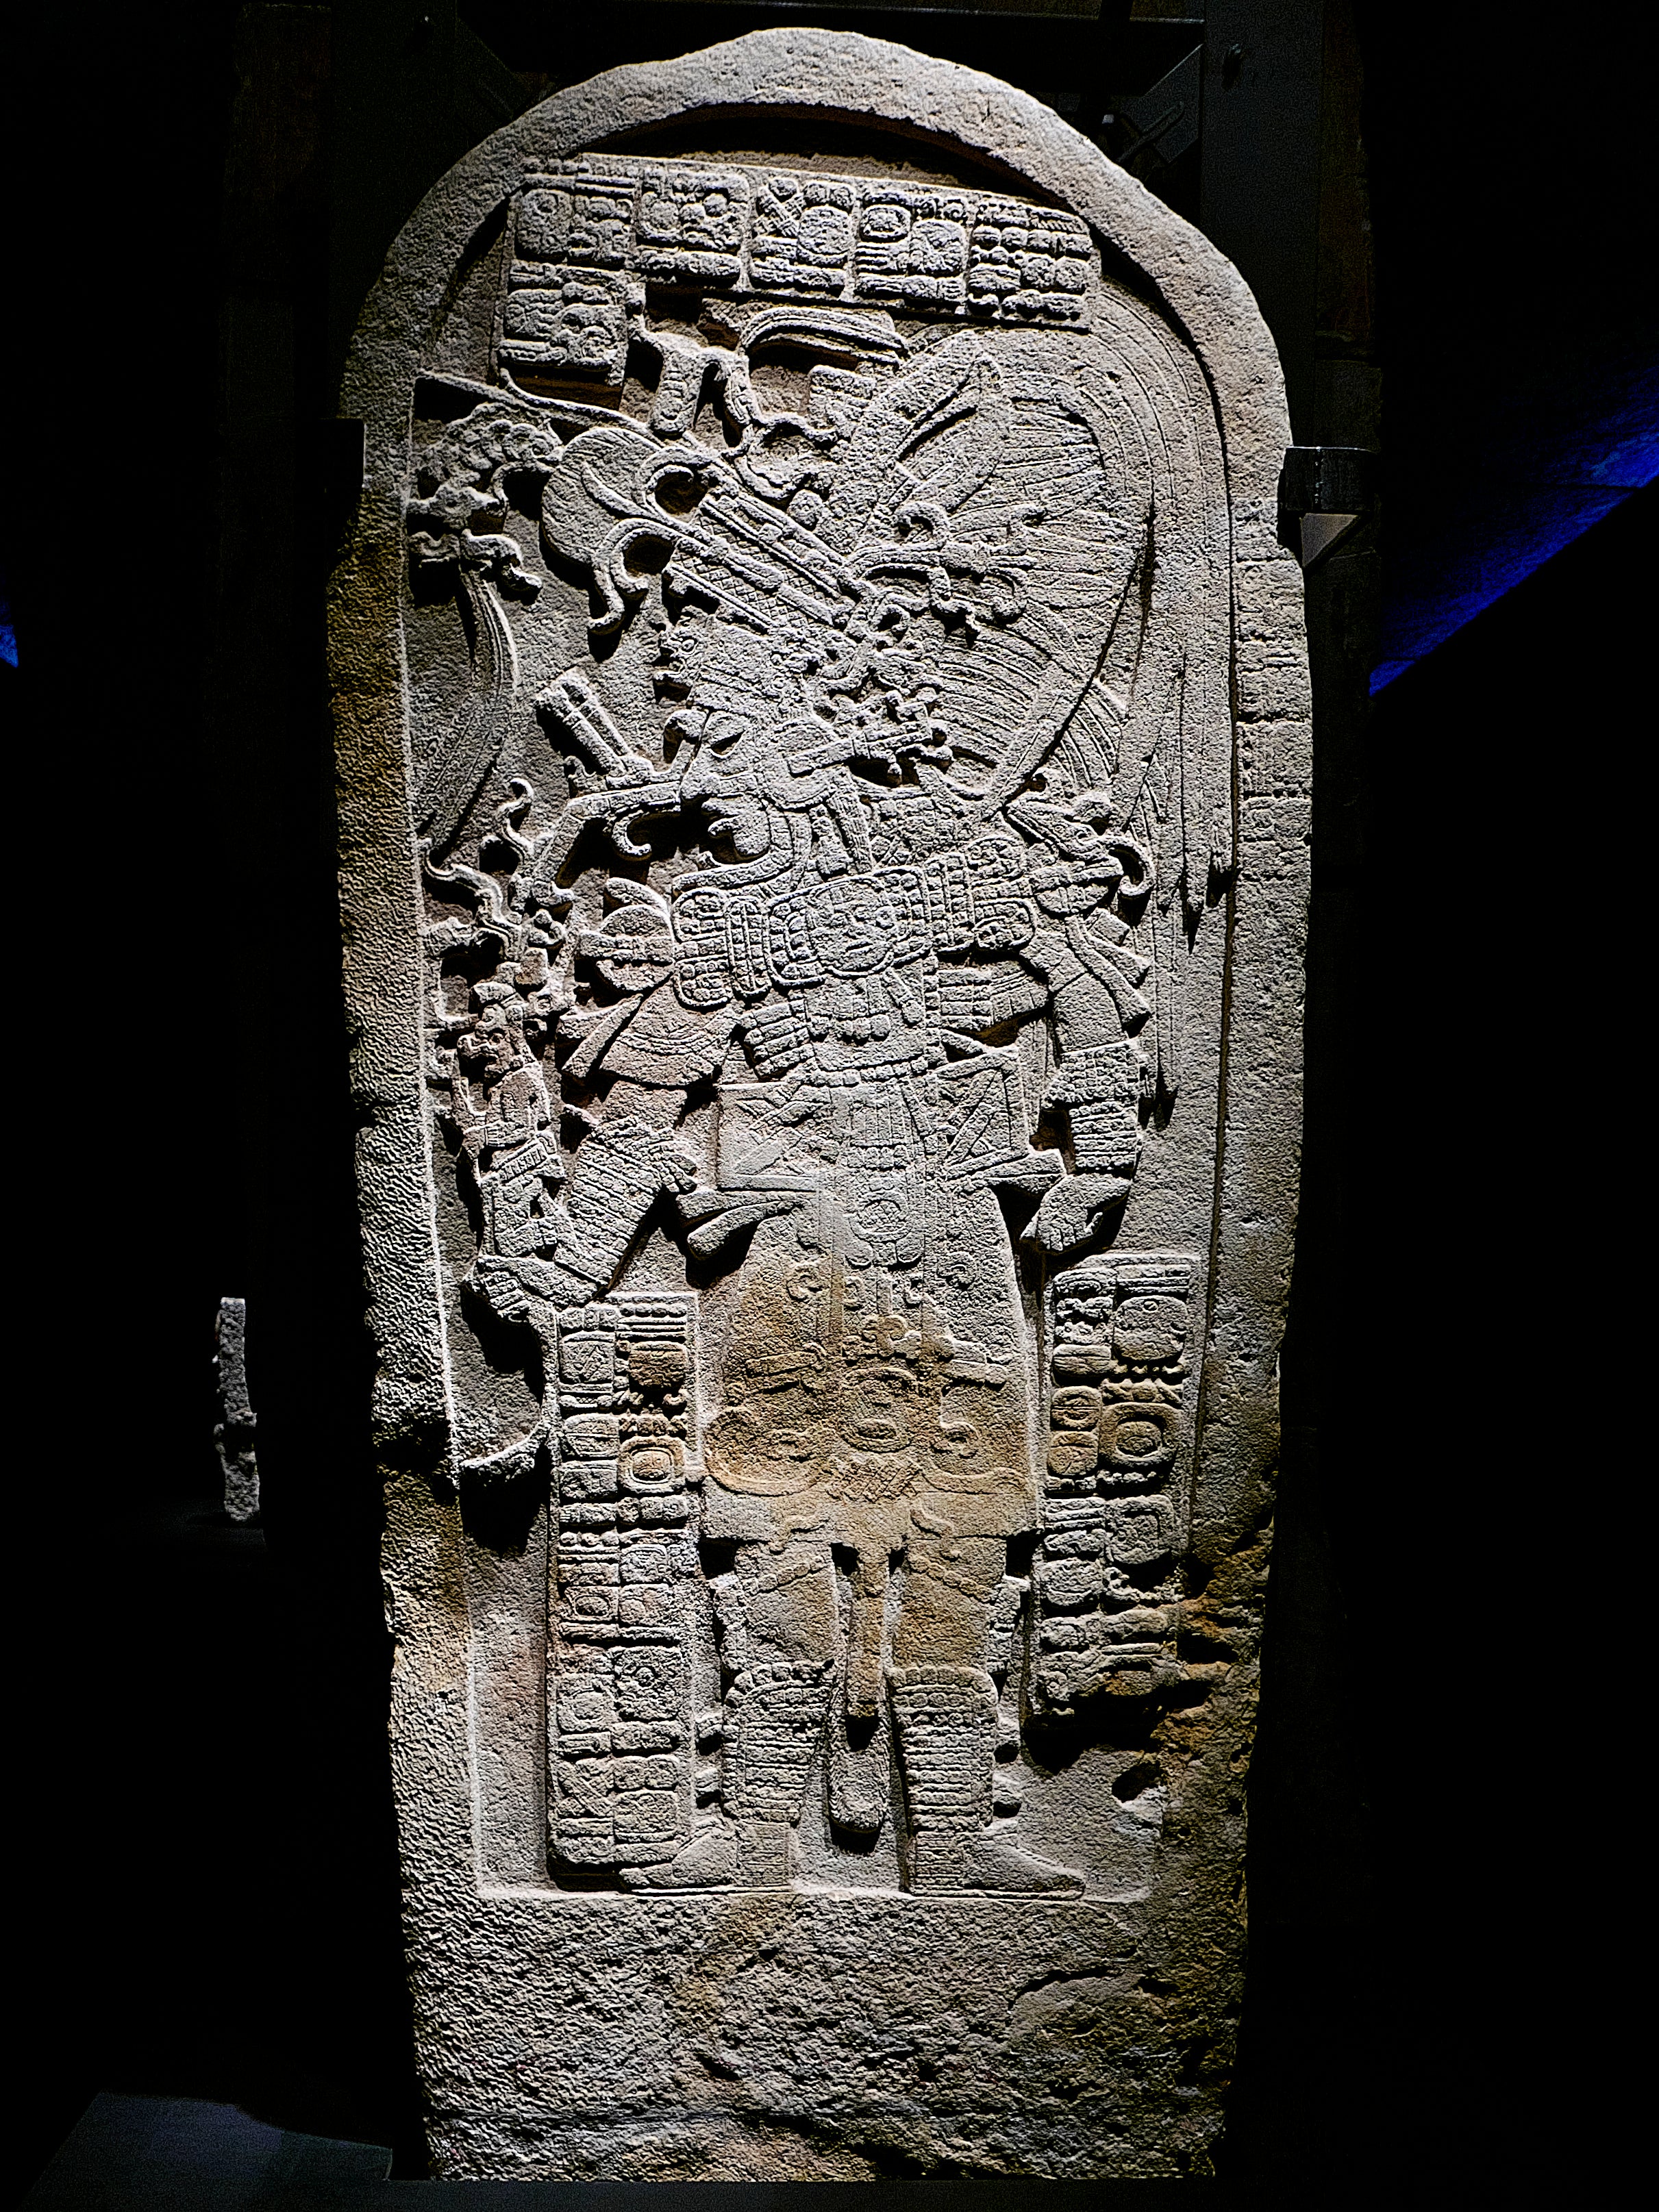 Maya royalty: an image of a ninth-century Maya ruler (a king of the city state of Machaquila in what is now Guatemala) gives some idea of what the probable conqueror of Ucanal must have looked like